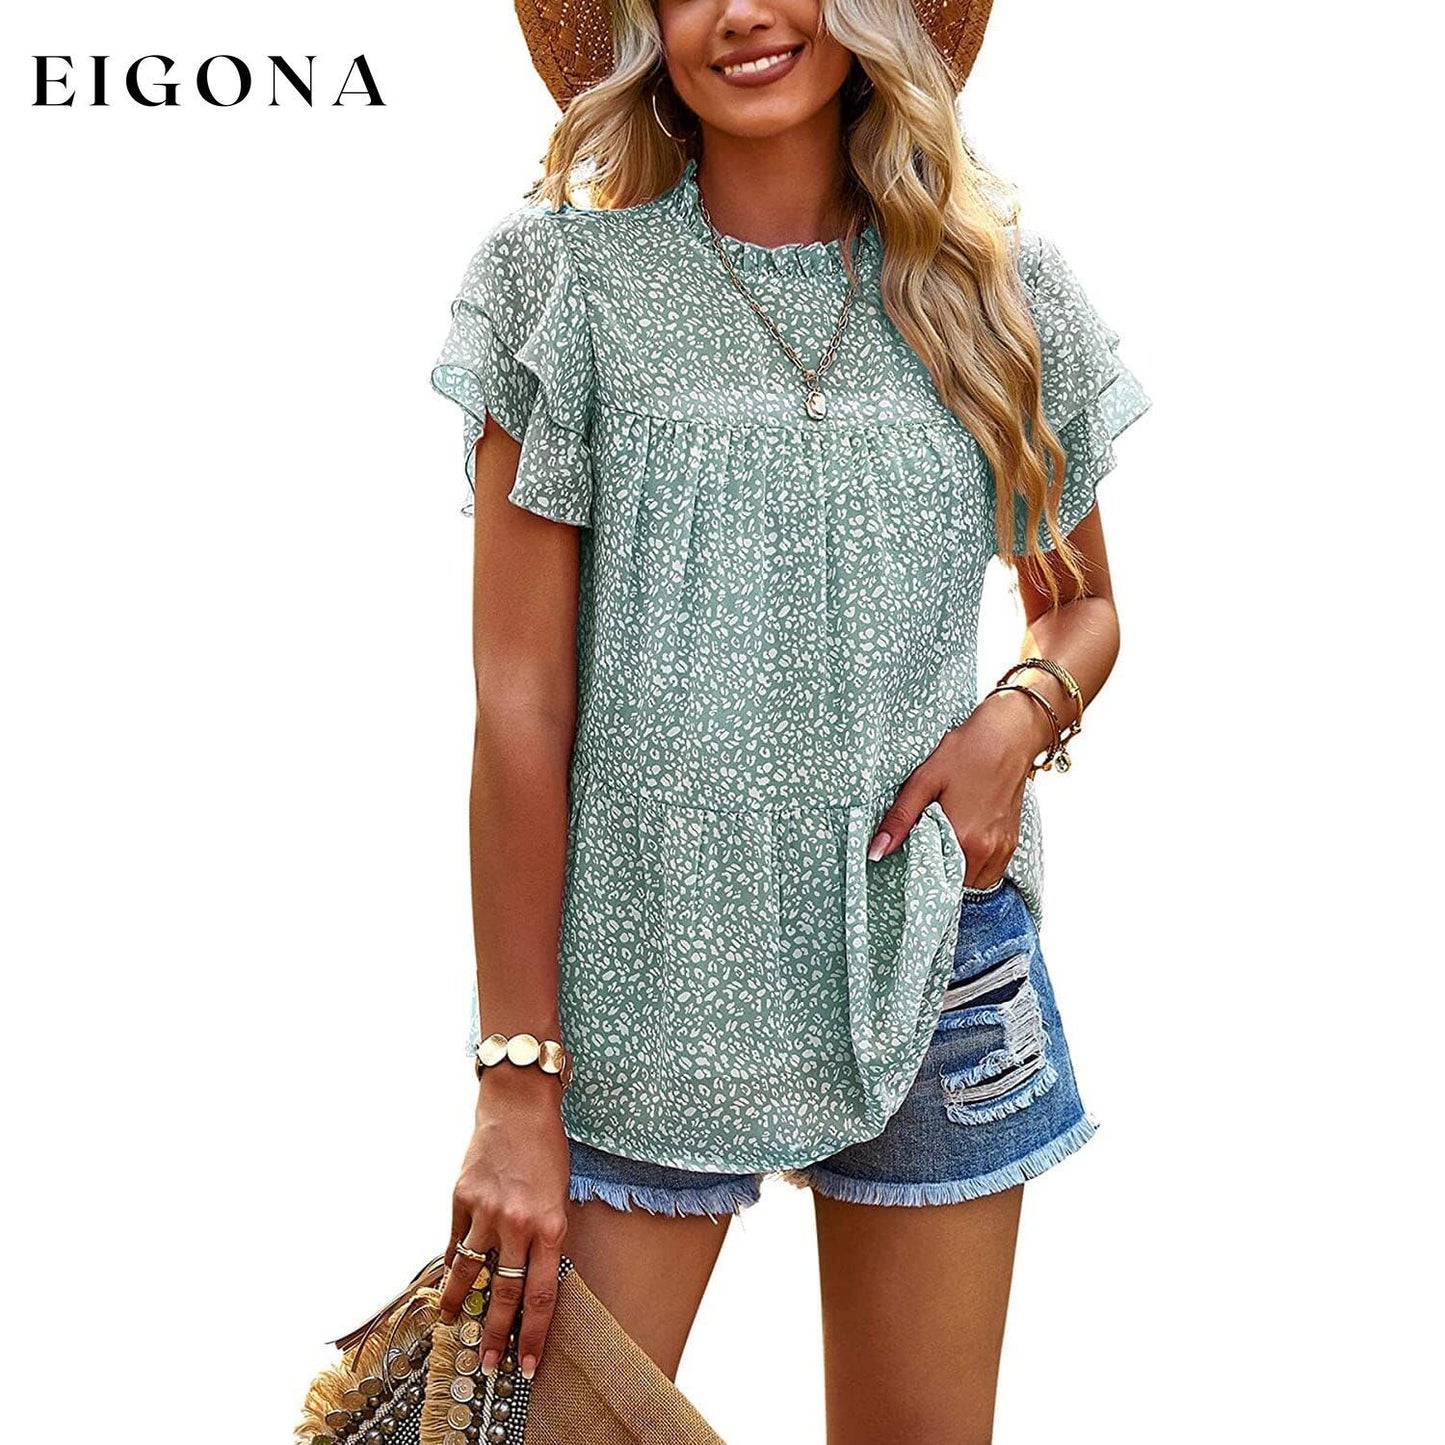 Women's Casual Summer Tops Ruffle Short Sleeve Mock Neck Fashion Floral Chiffon Blouse Shirts Green __stock:200 clothes refund_fee:1200 tops